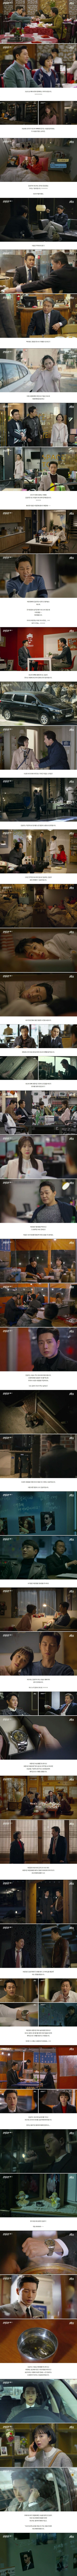 episodes 5 and 6 captures for the Korean drama 'Man to Man'